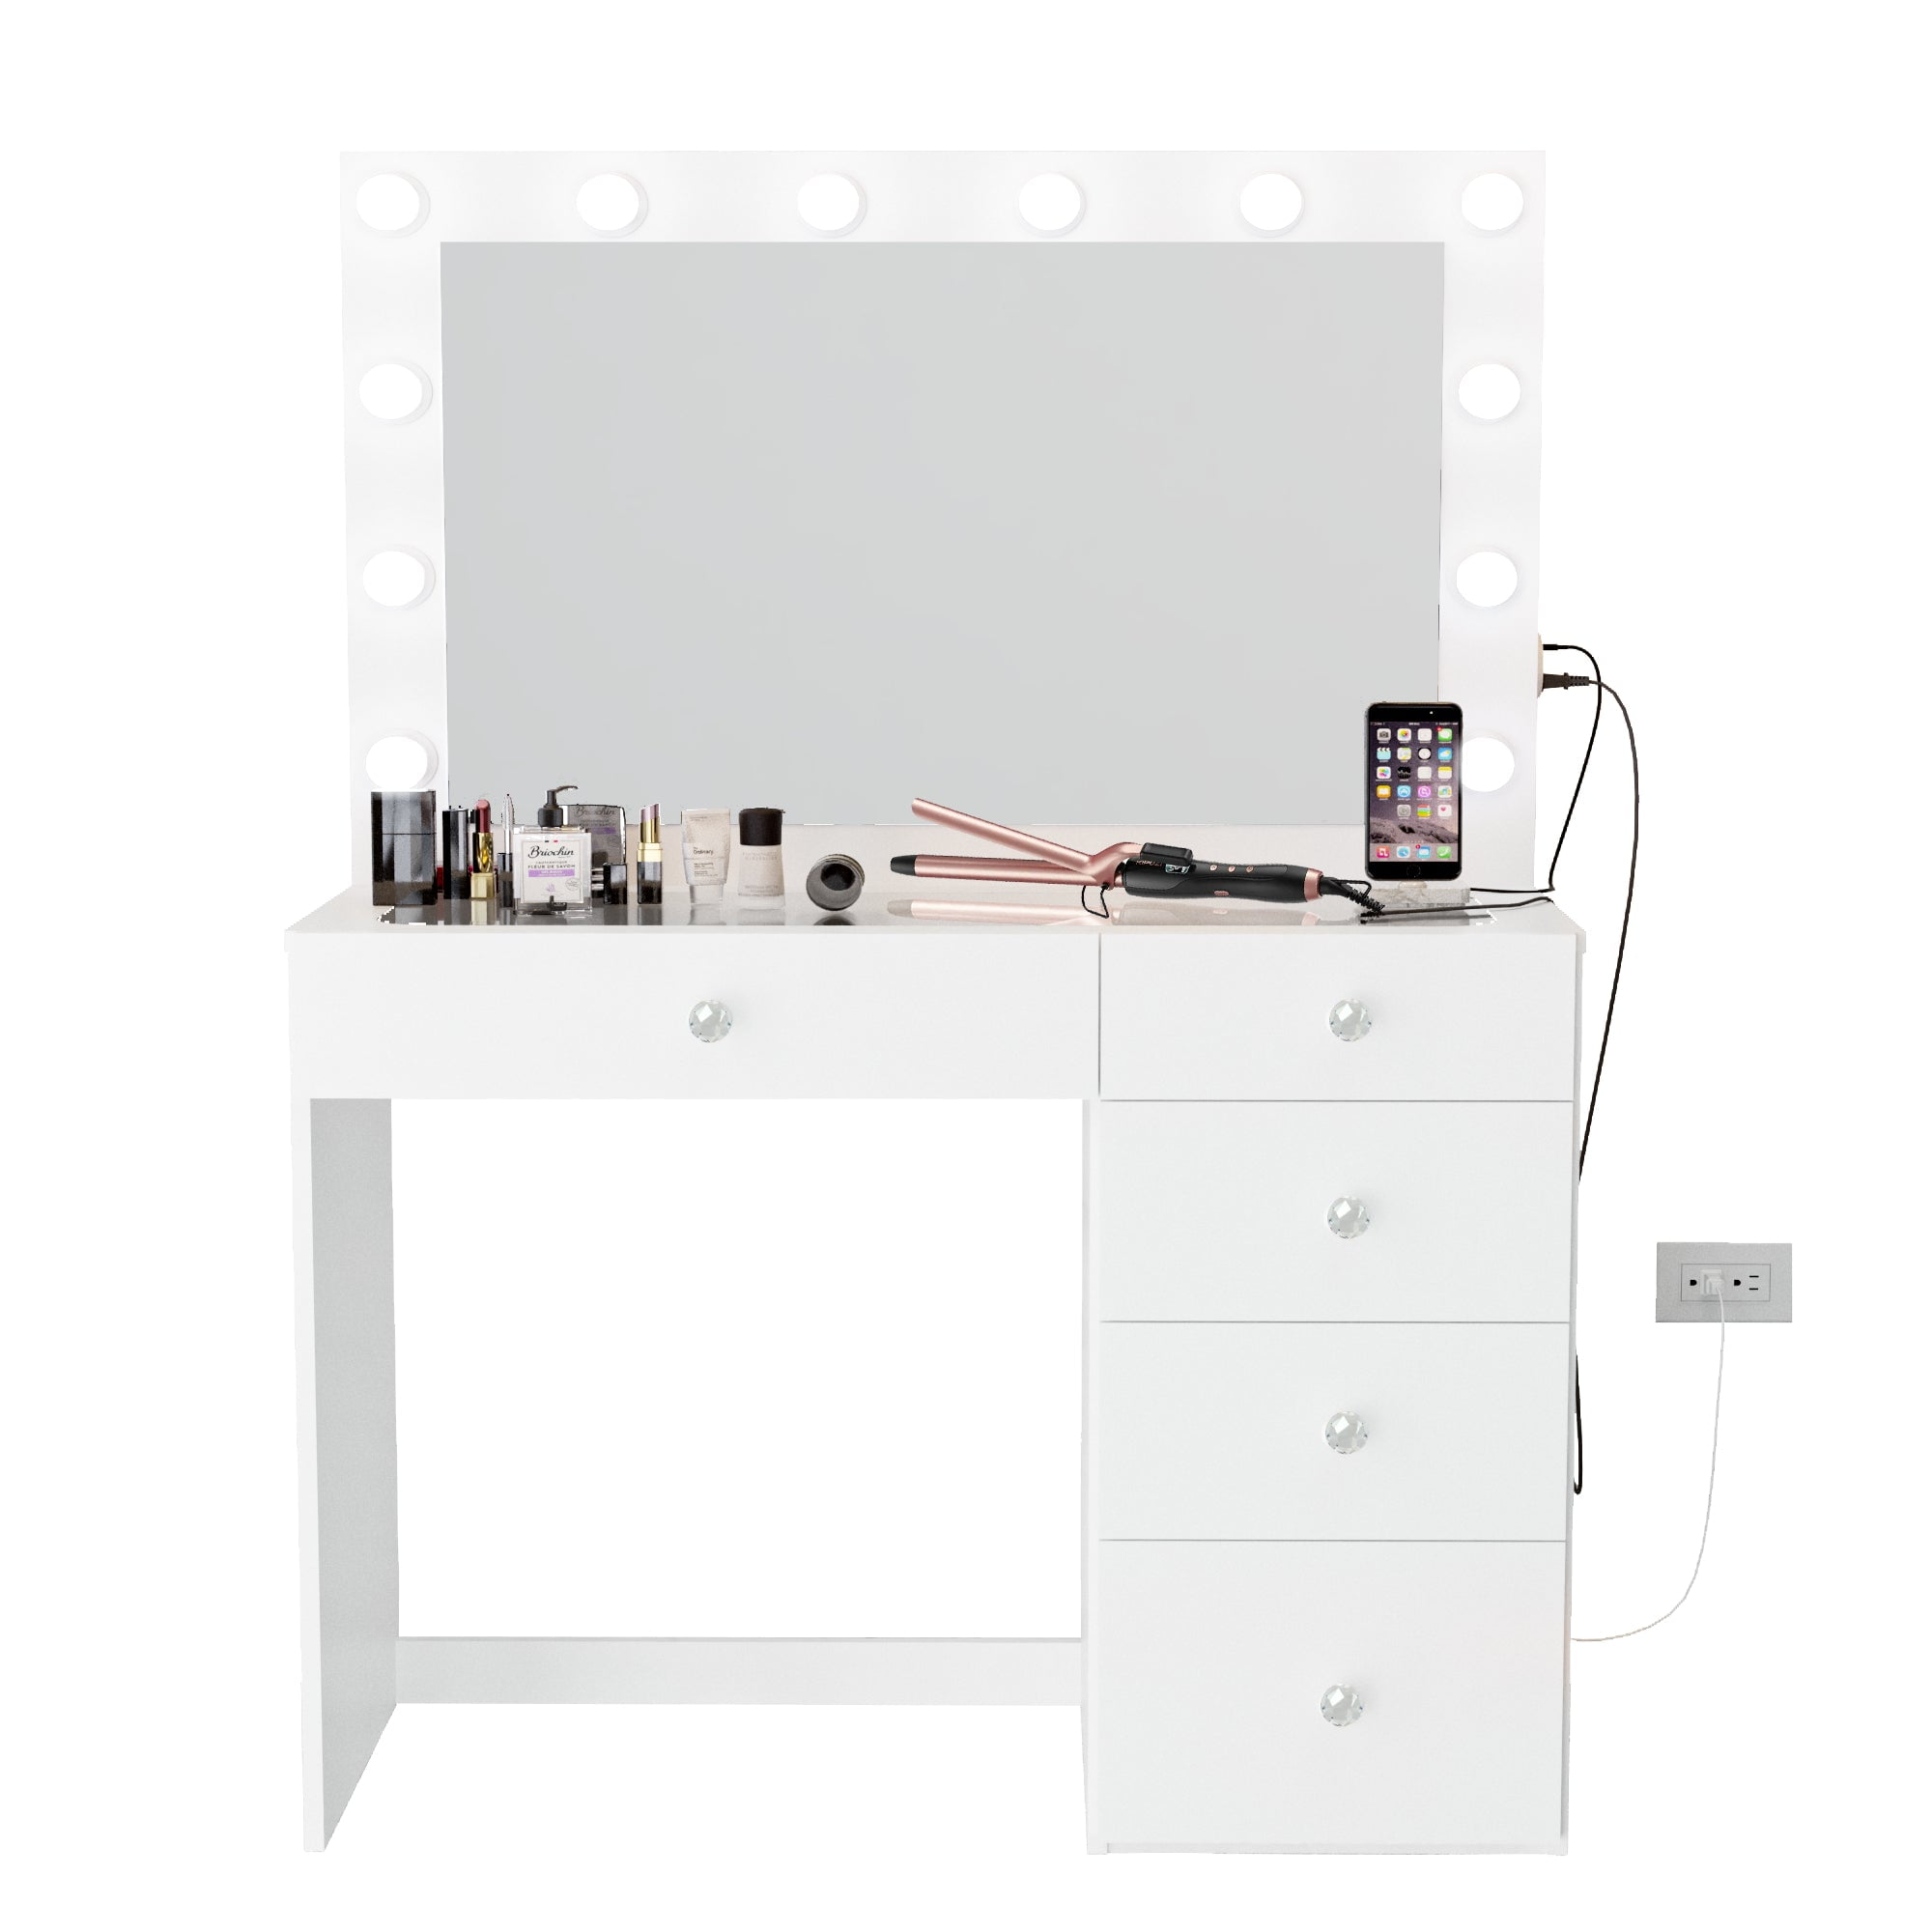 Boahaus Ball with Crystal Vanity and Knobs, Mirror Alana Lights, Drawers, Desk 5 White Black